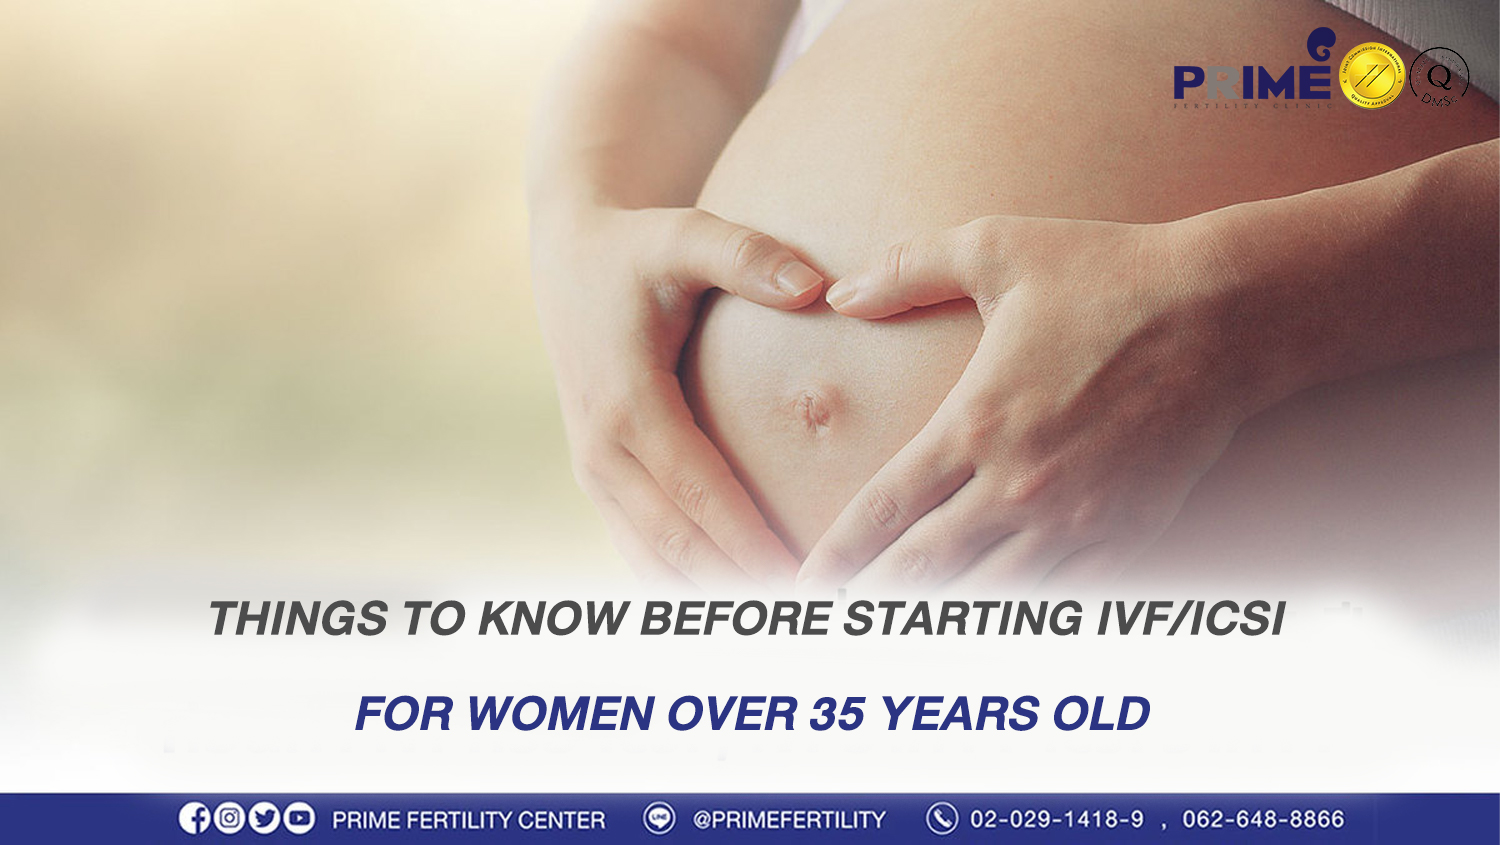 Things to know before starting IVF/ICSI for women over 35 years old